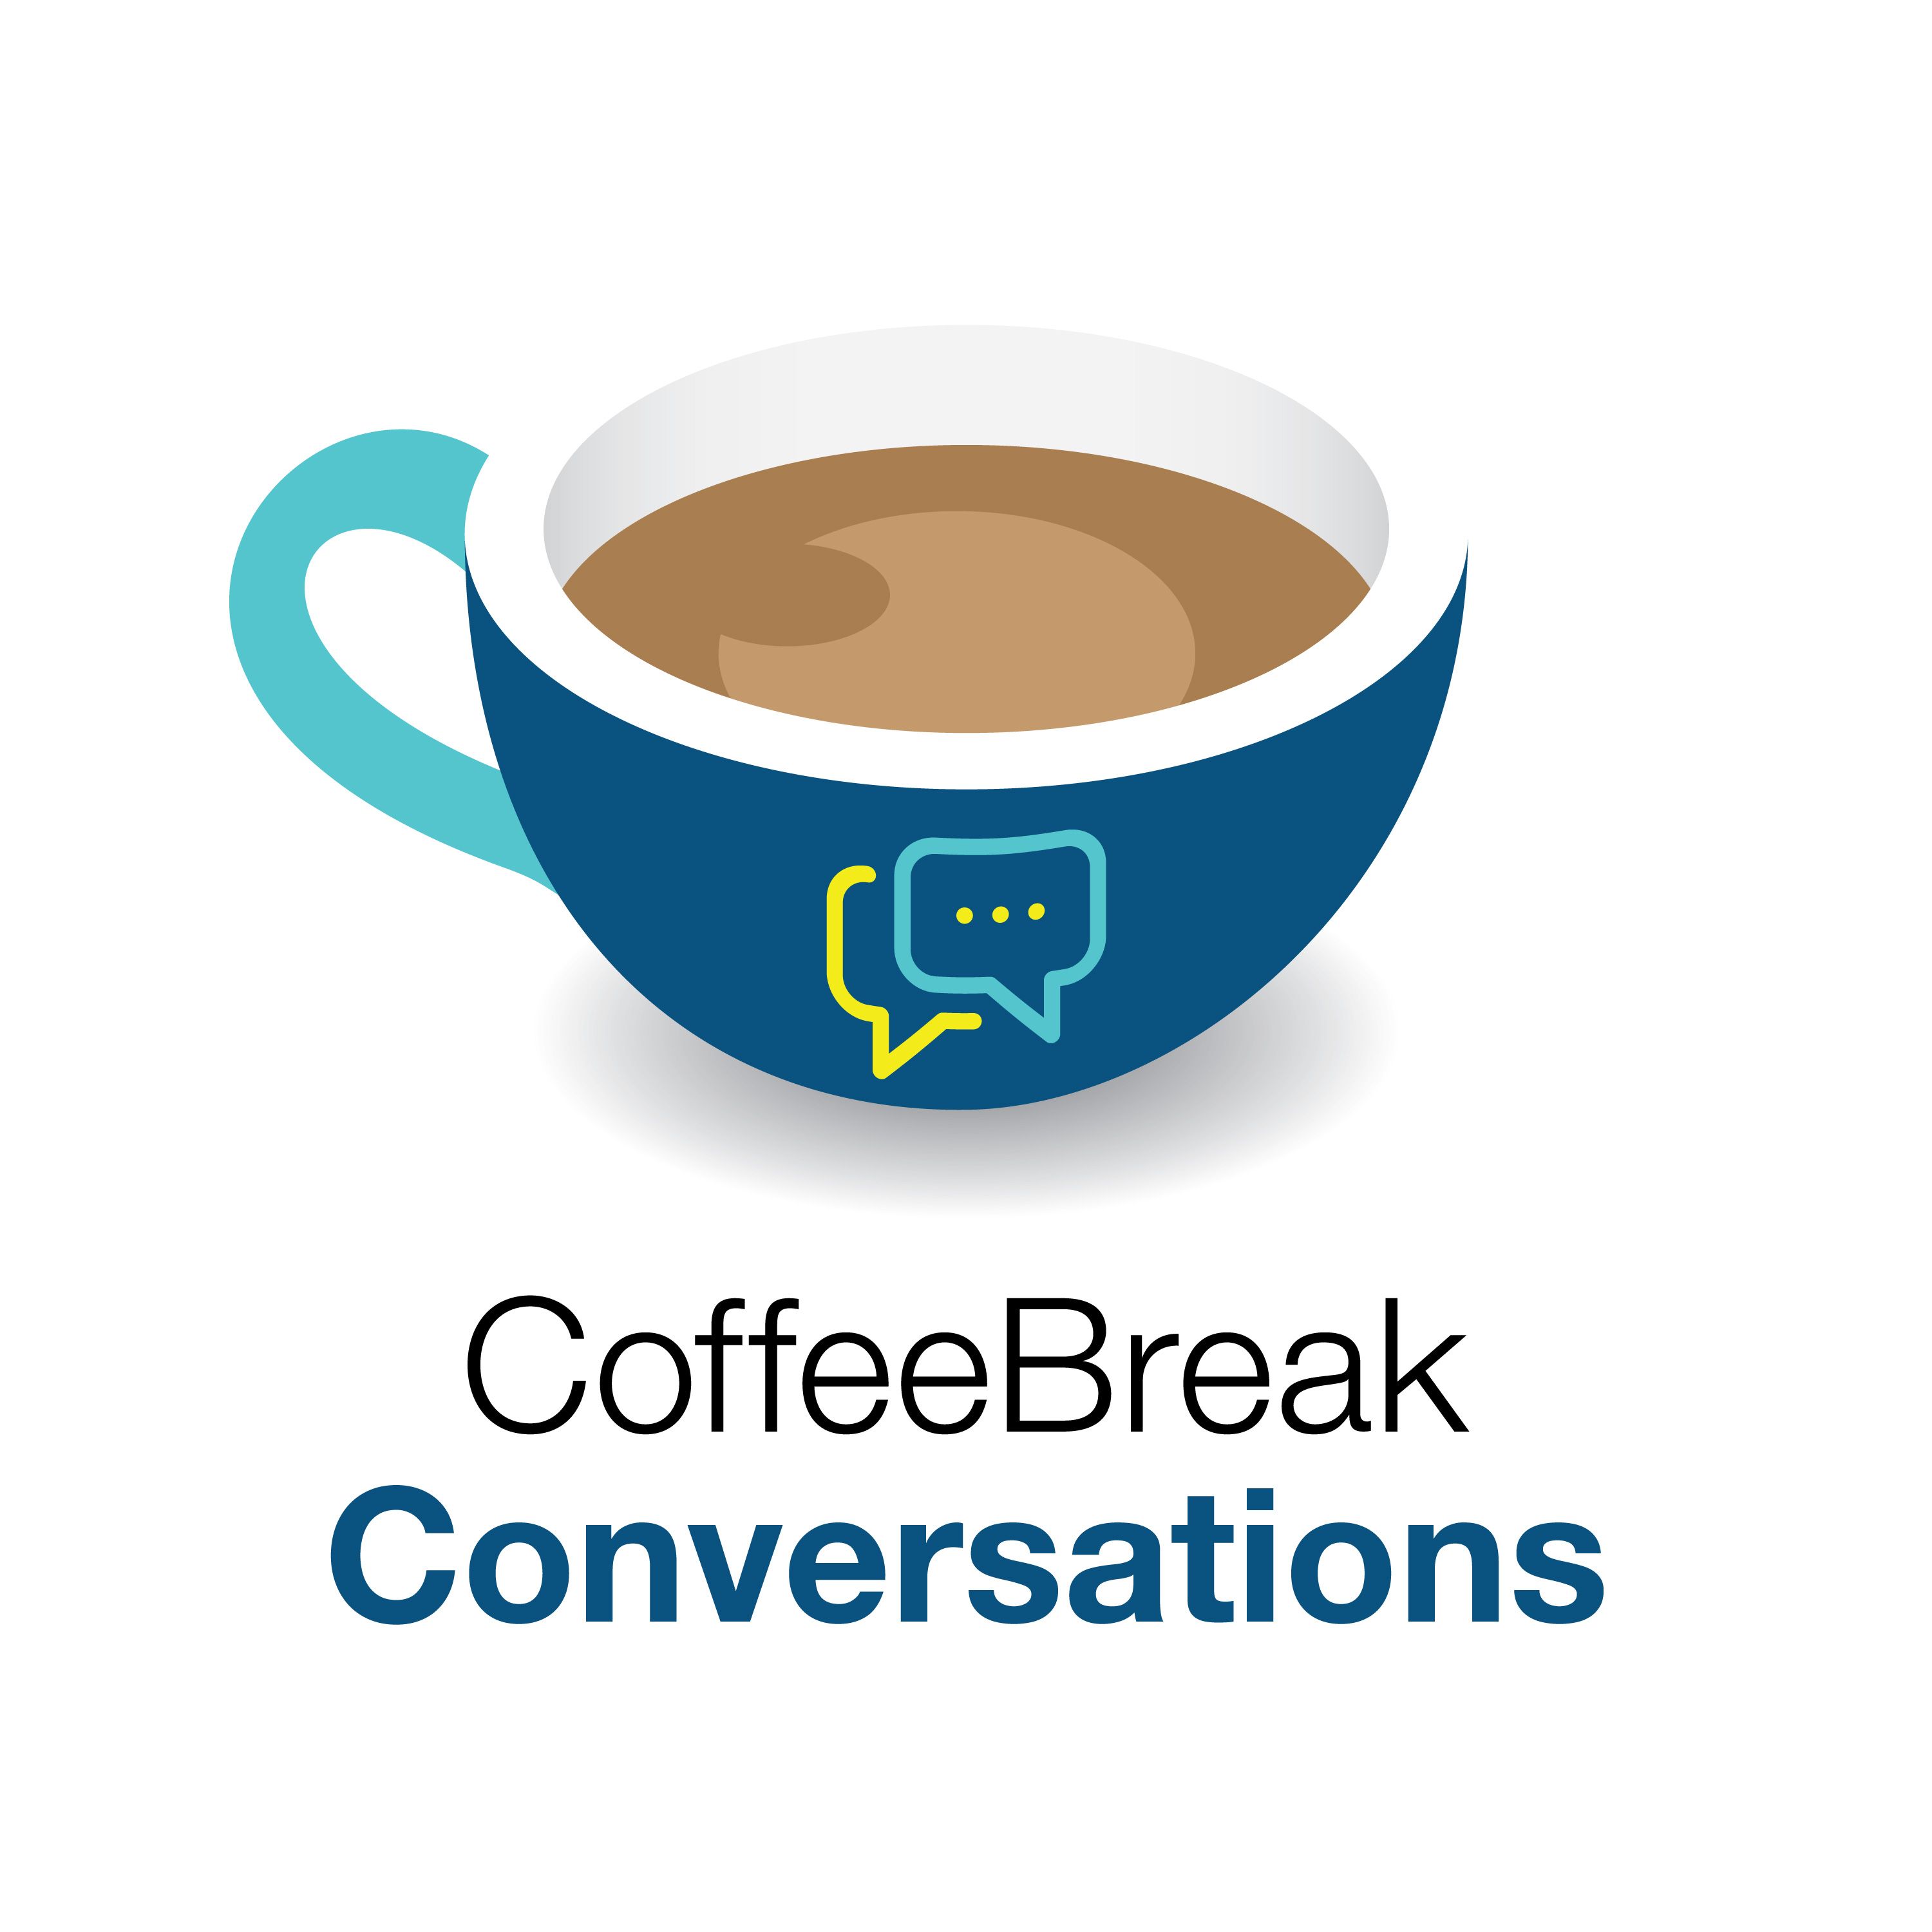 A Coffee Break Conversation with Bec Howie from Irregular Endings